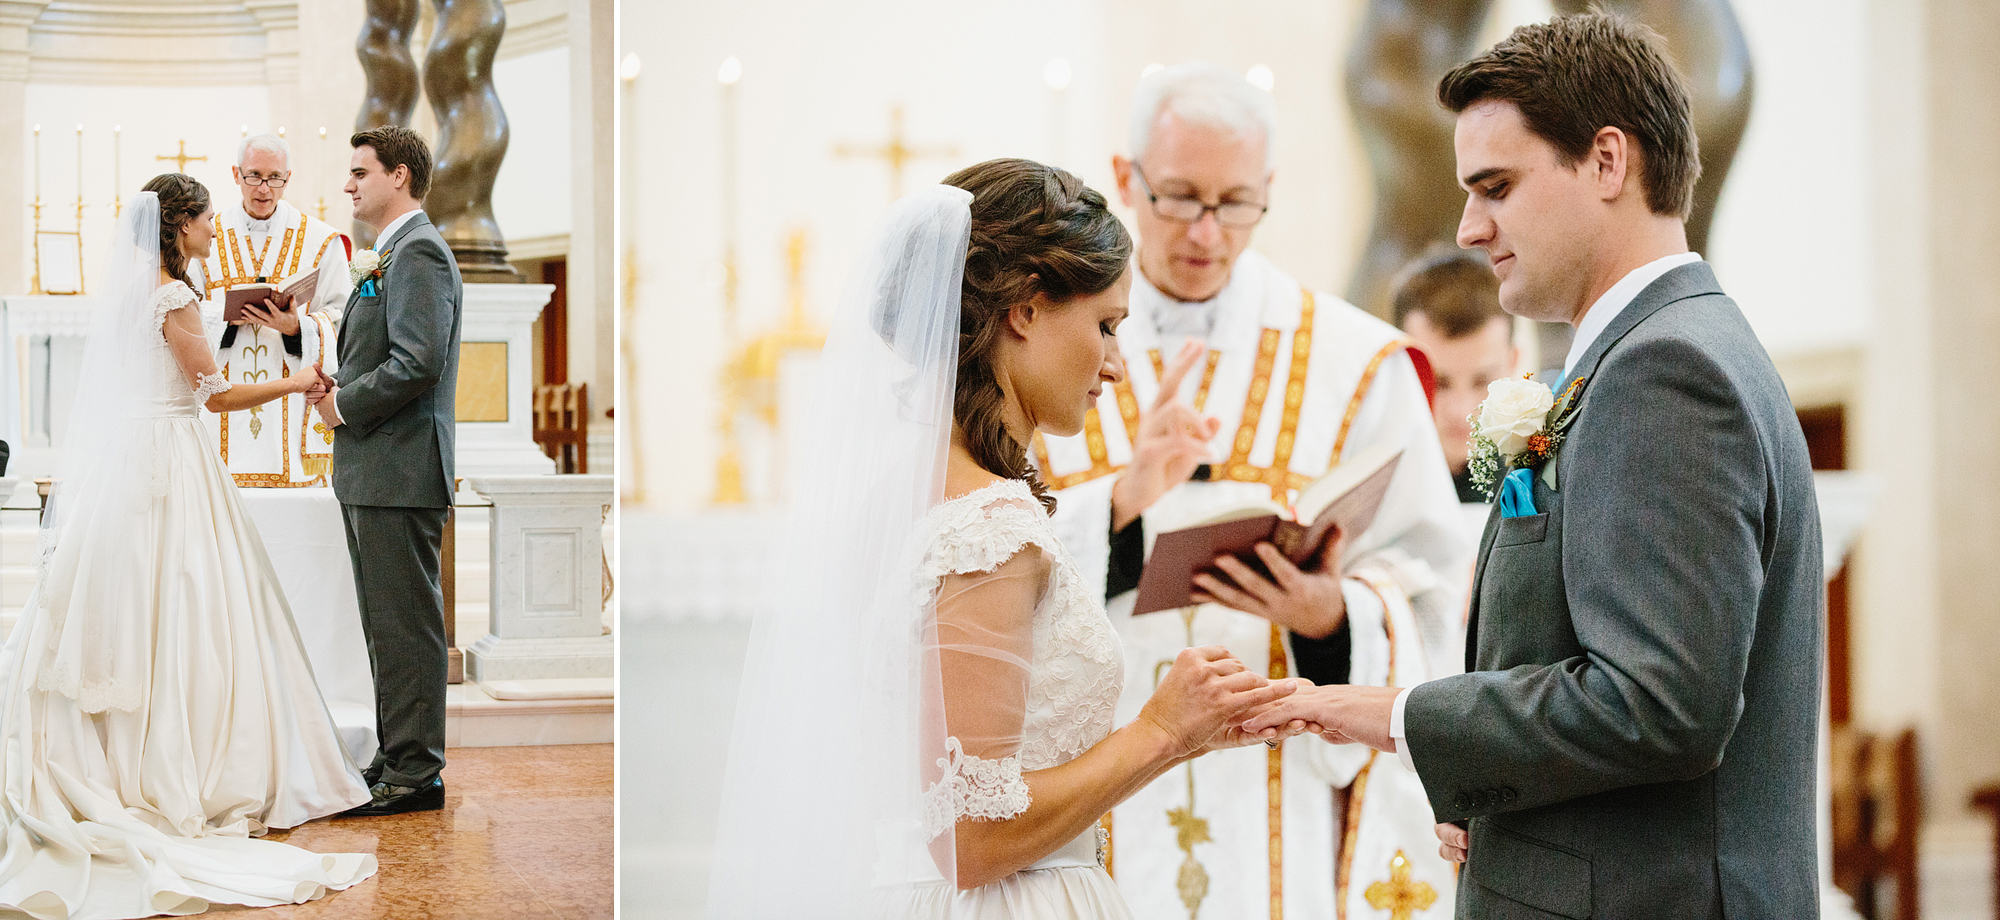 These are photos of Annie and Chris exchanging rings.